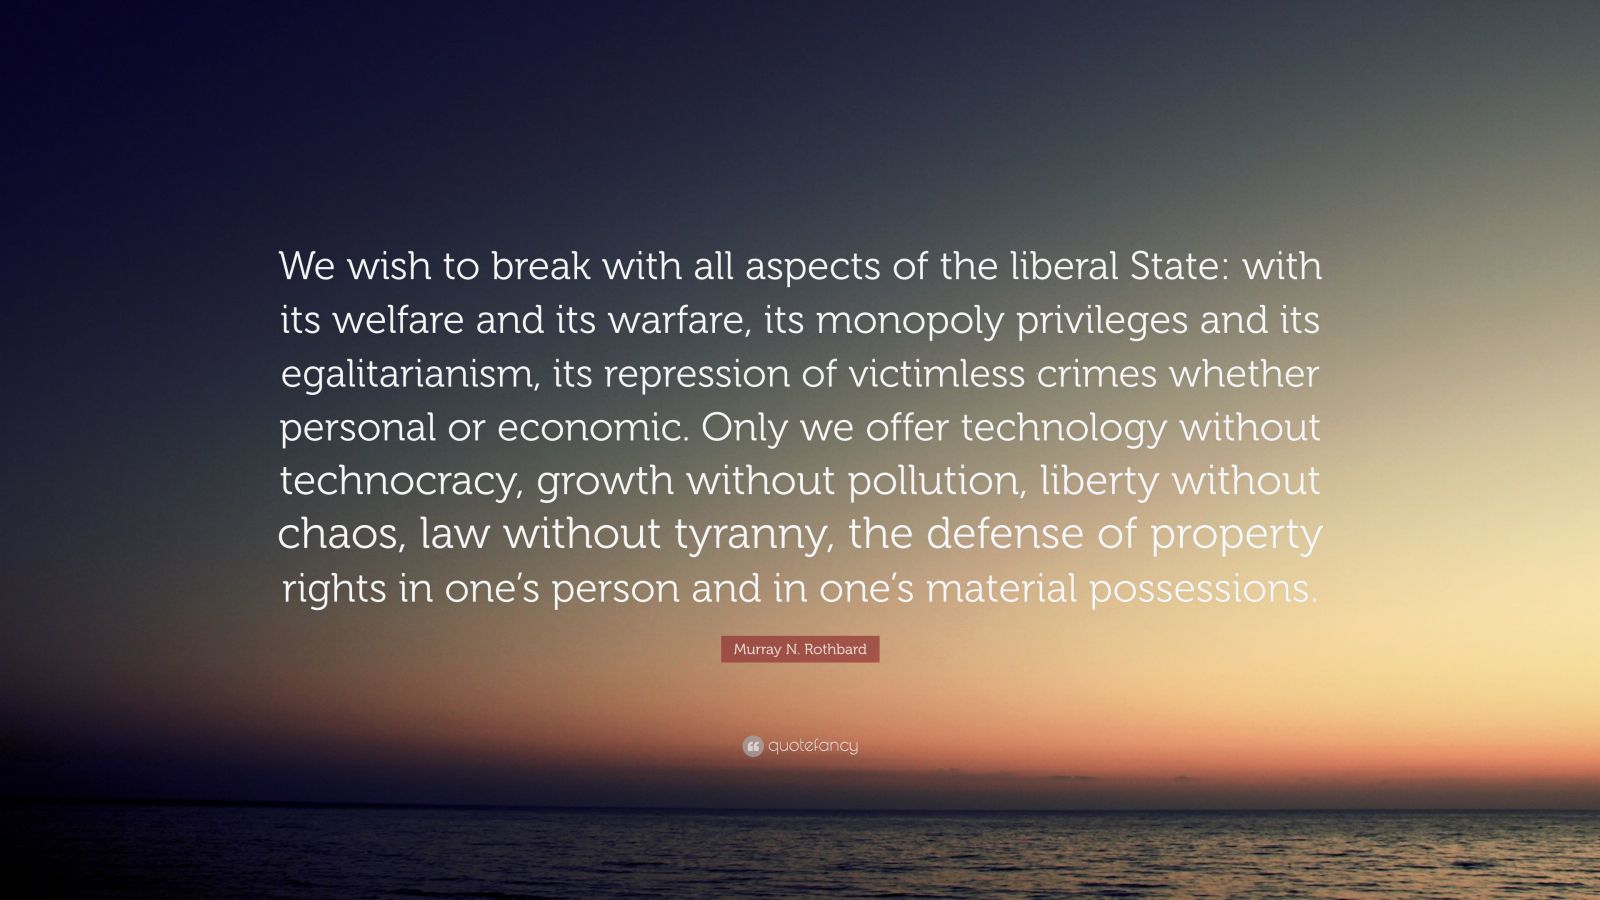 Conceived in Liberty by Murray N. Rothbard